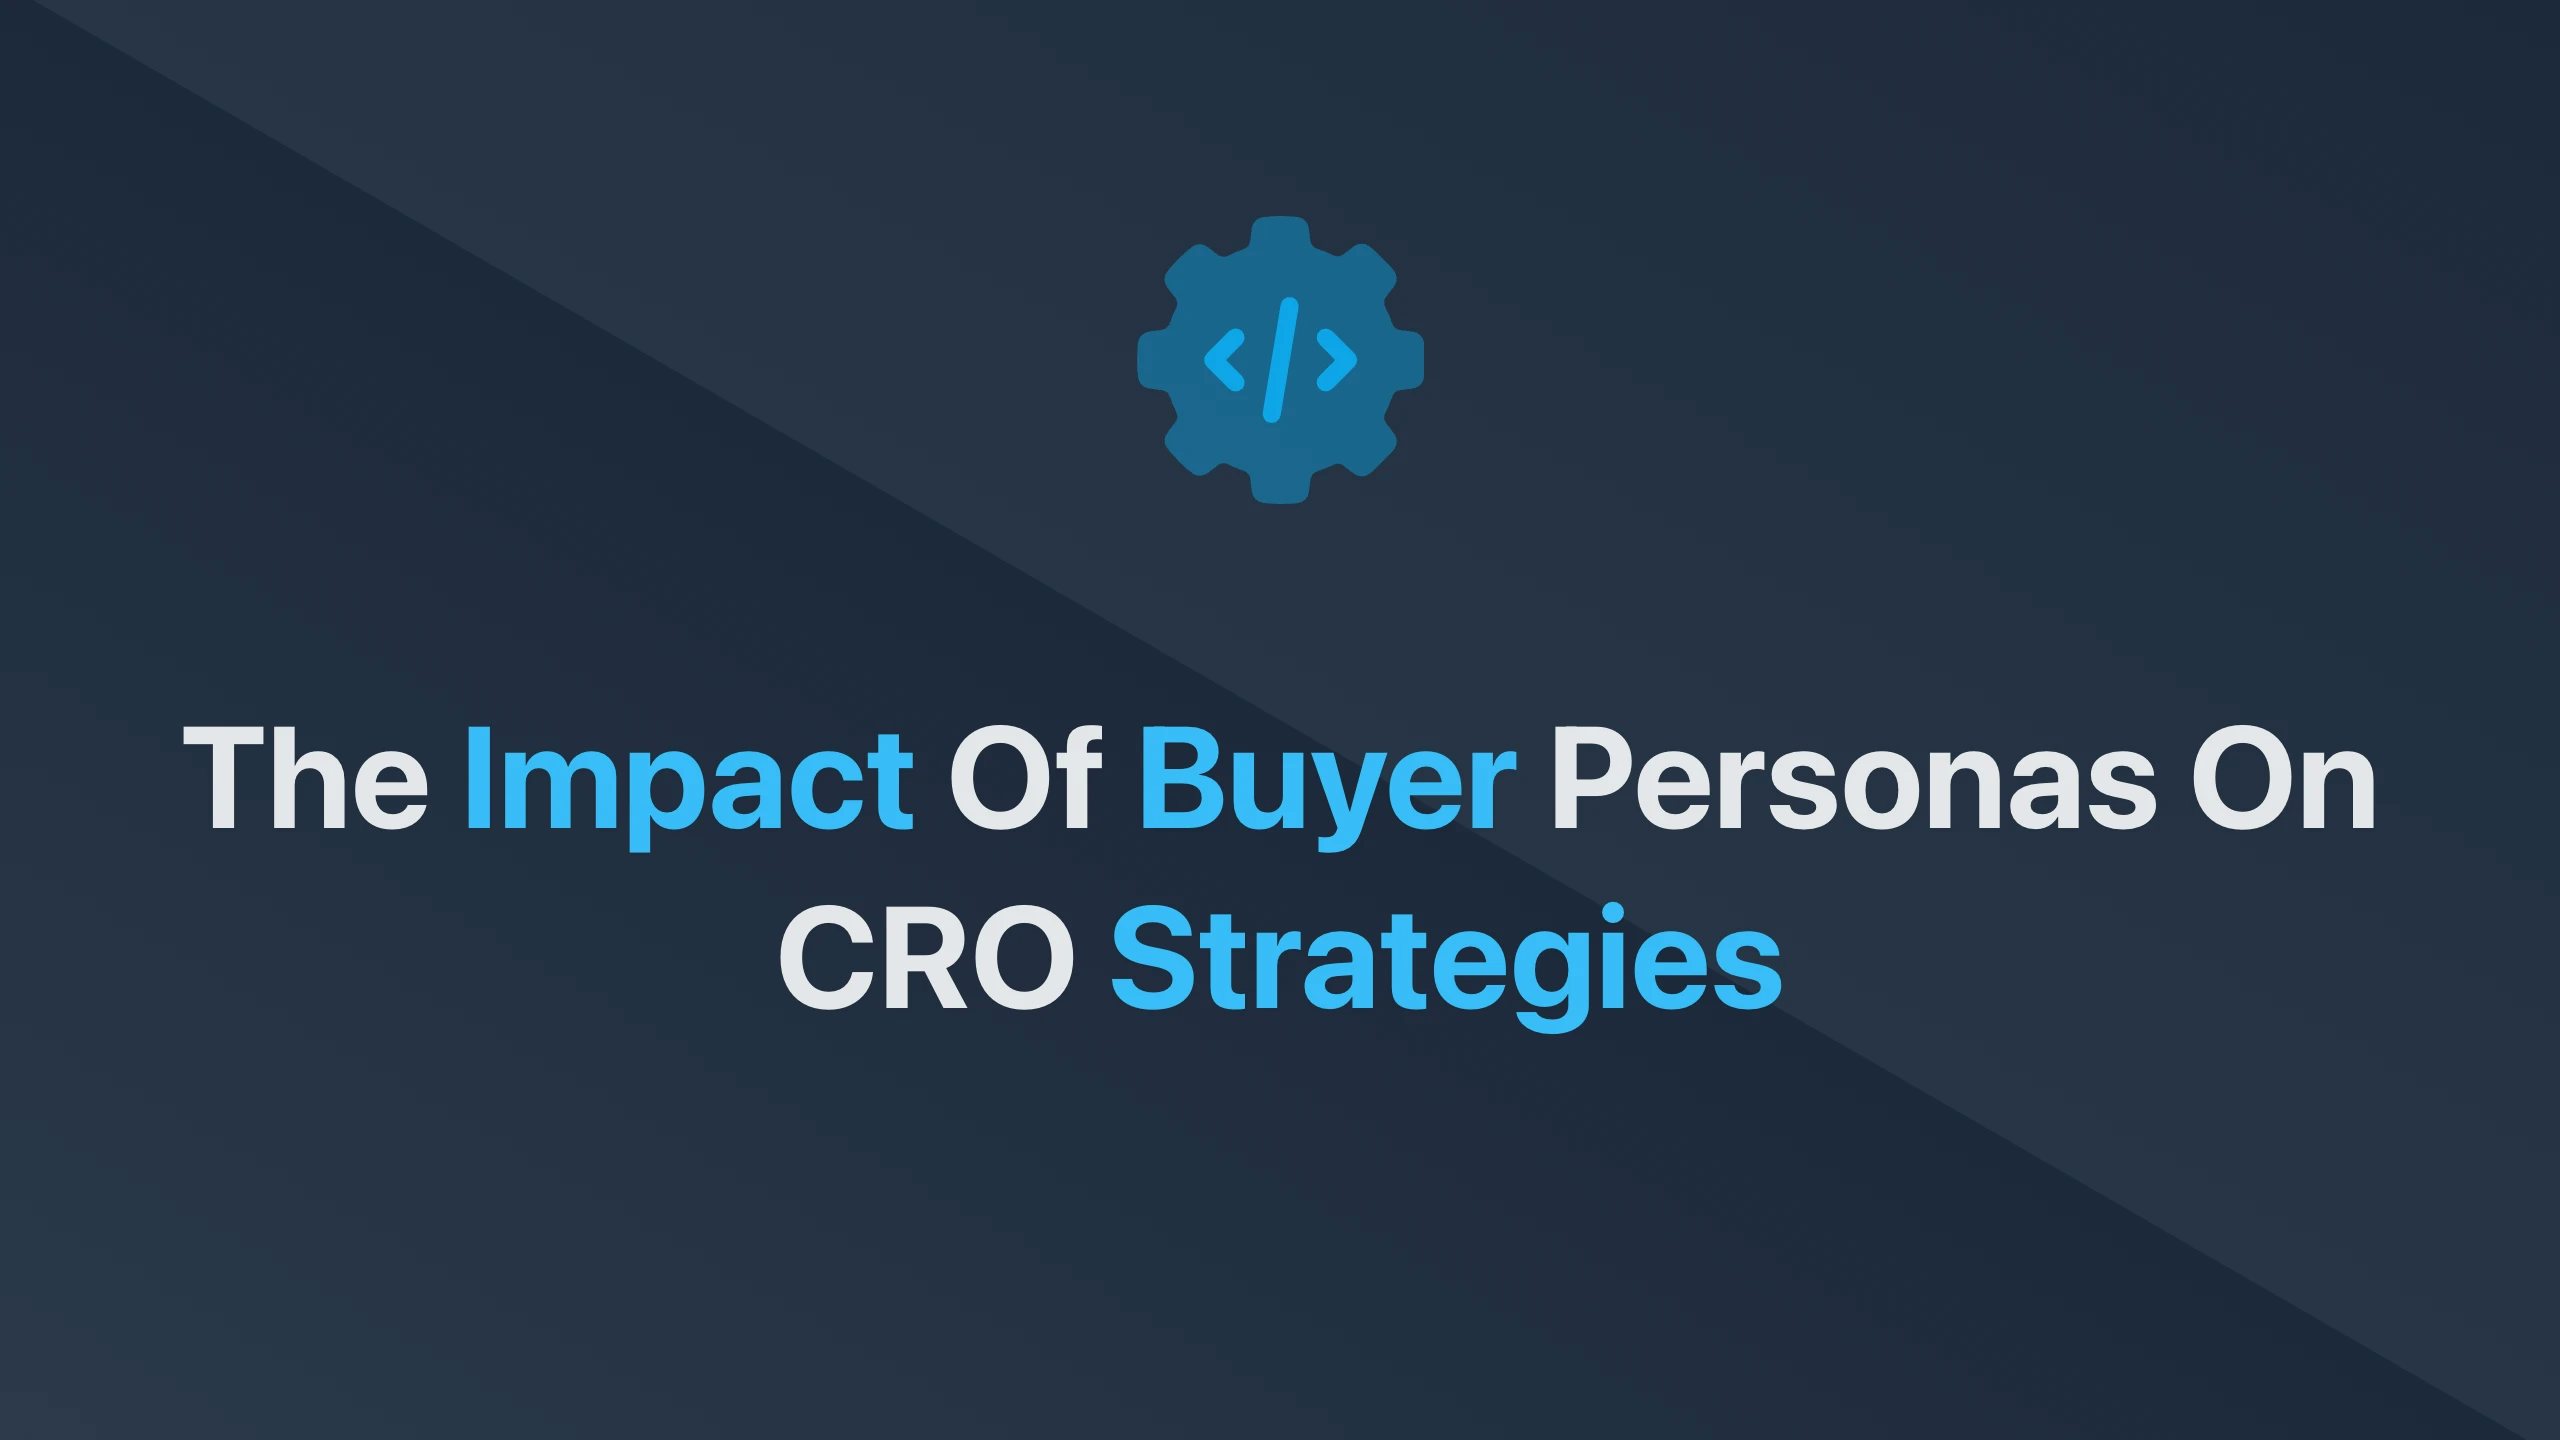 Cover Image for The Impact of Buyer Personas on CRO Strategies